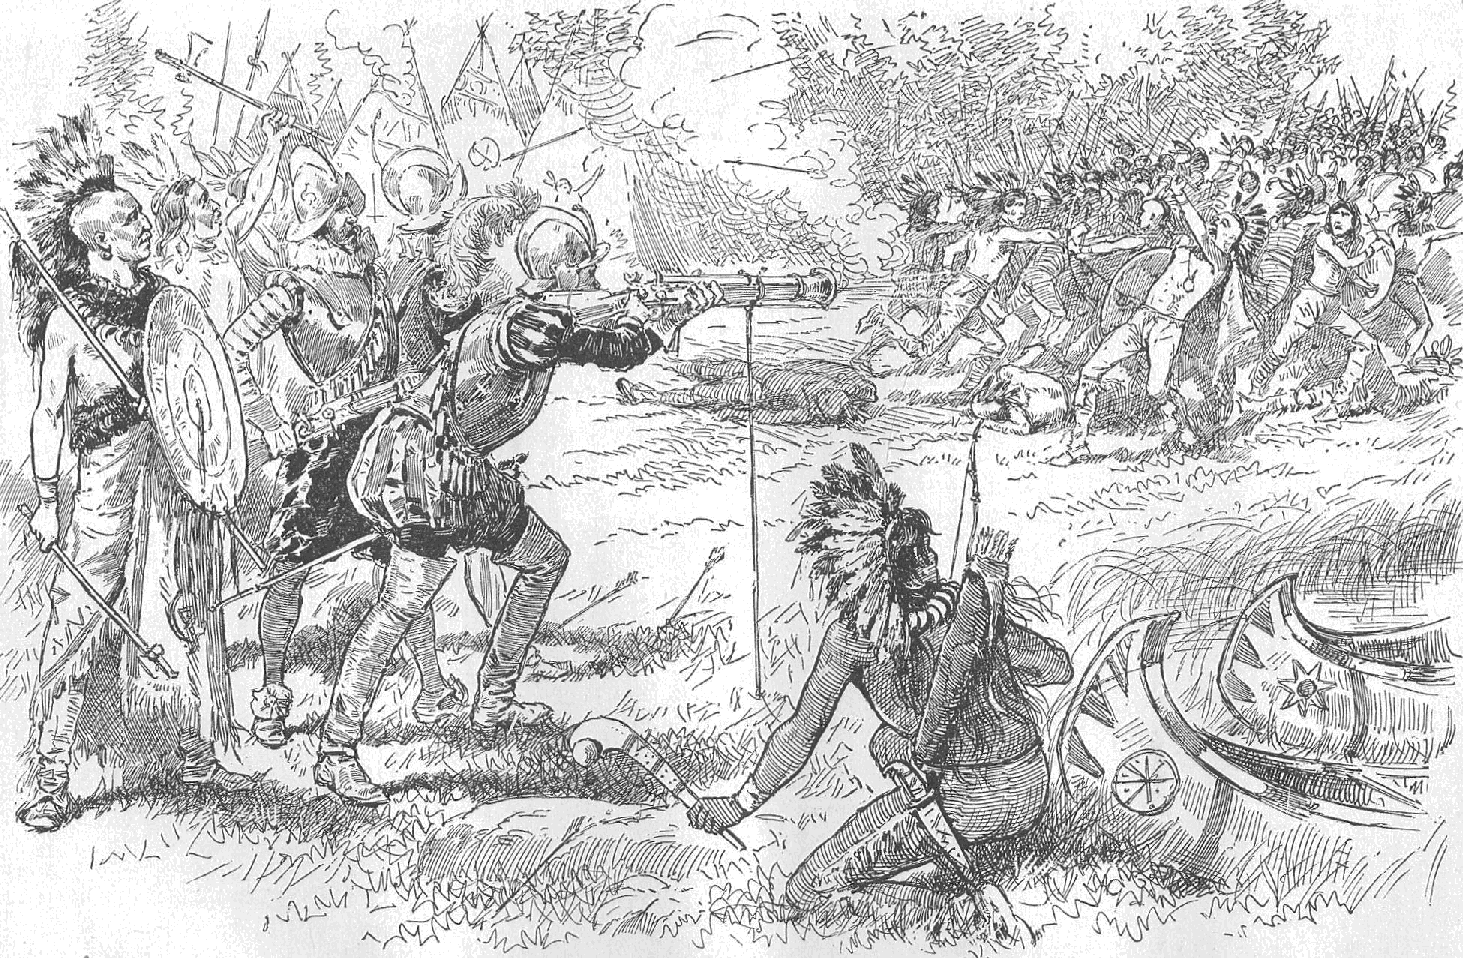 Battle with Iroquois